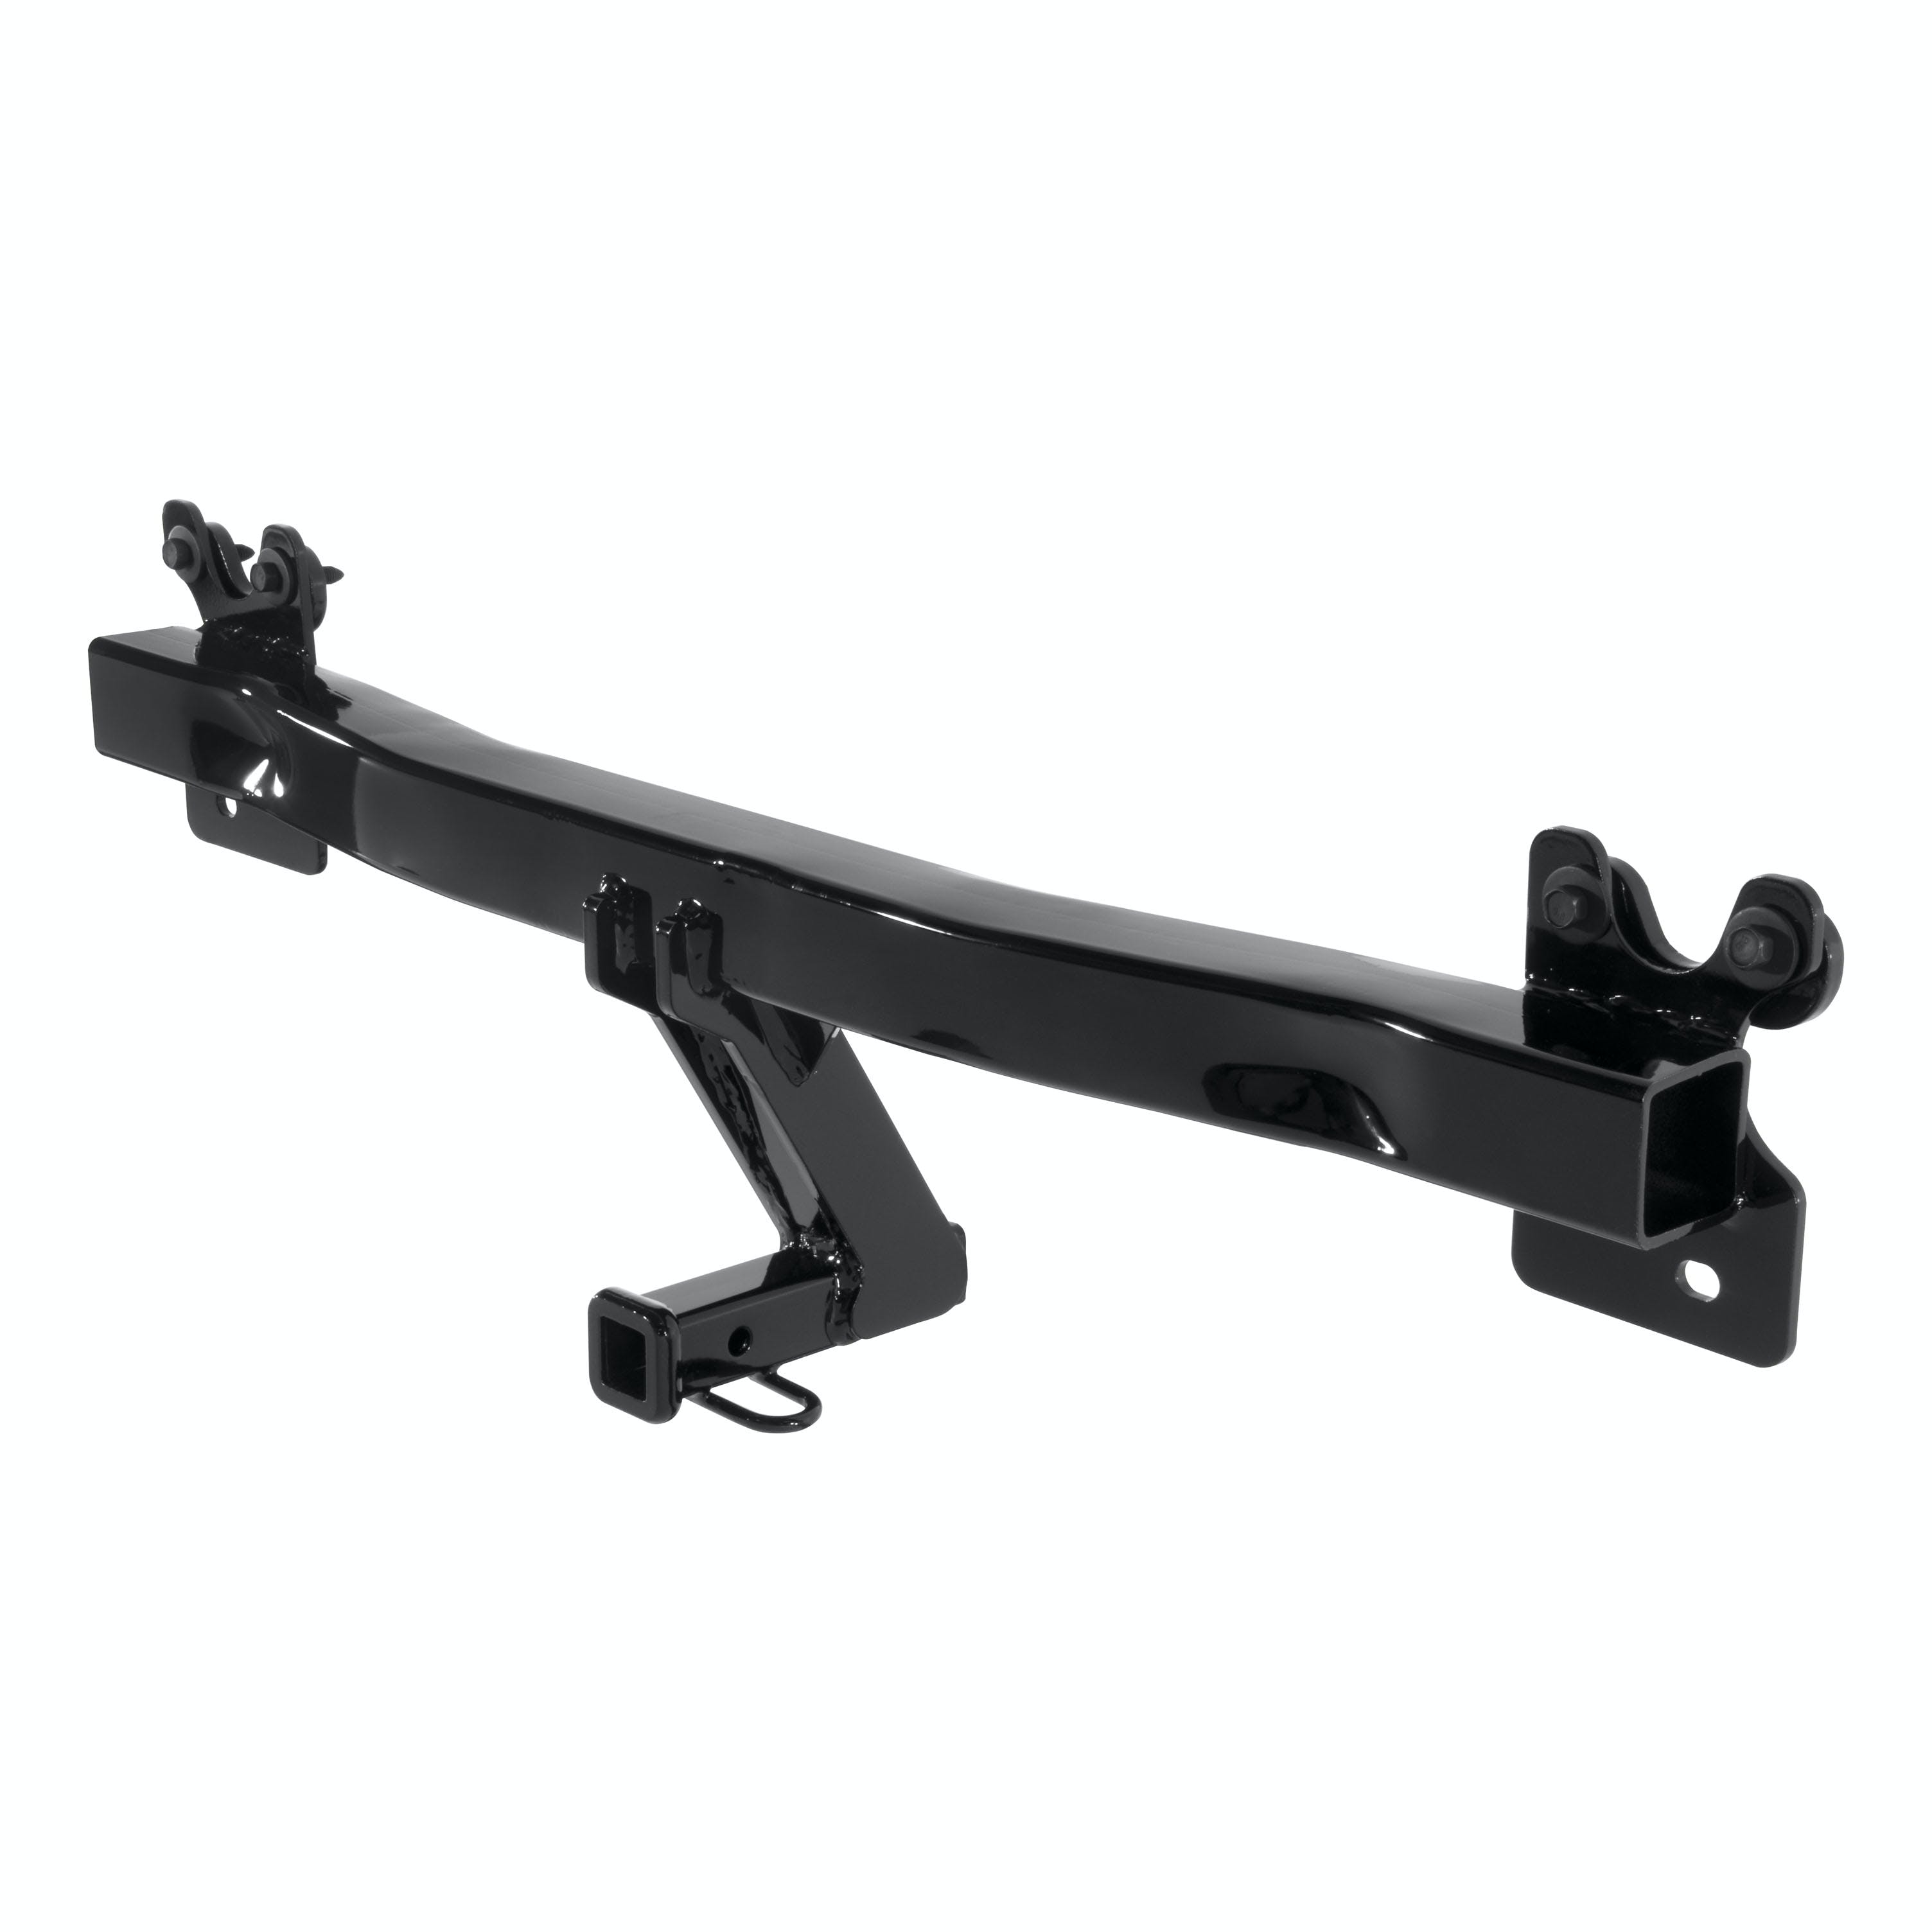 CURT 12066 Class 2 Hitch, 1-1/4 Receiver, Select Volvo S60, V60, Cross Country, V70, XC70